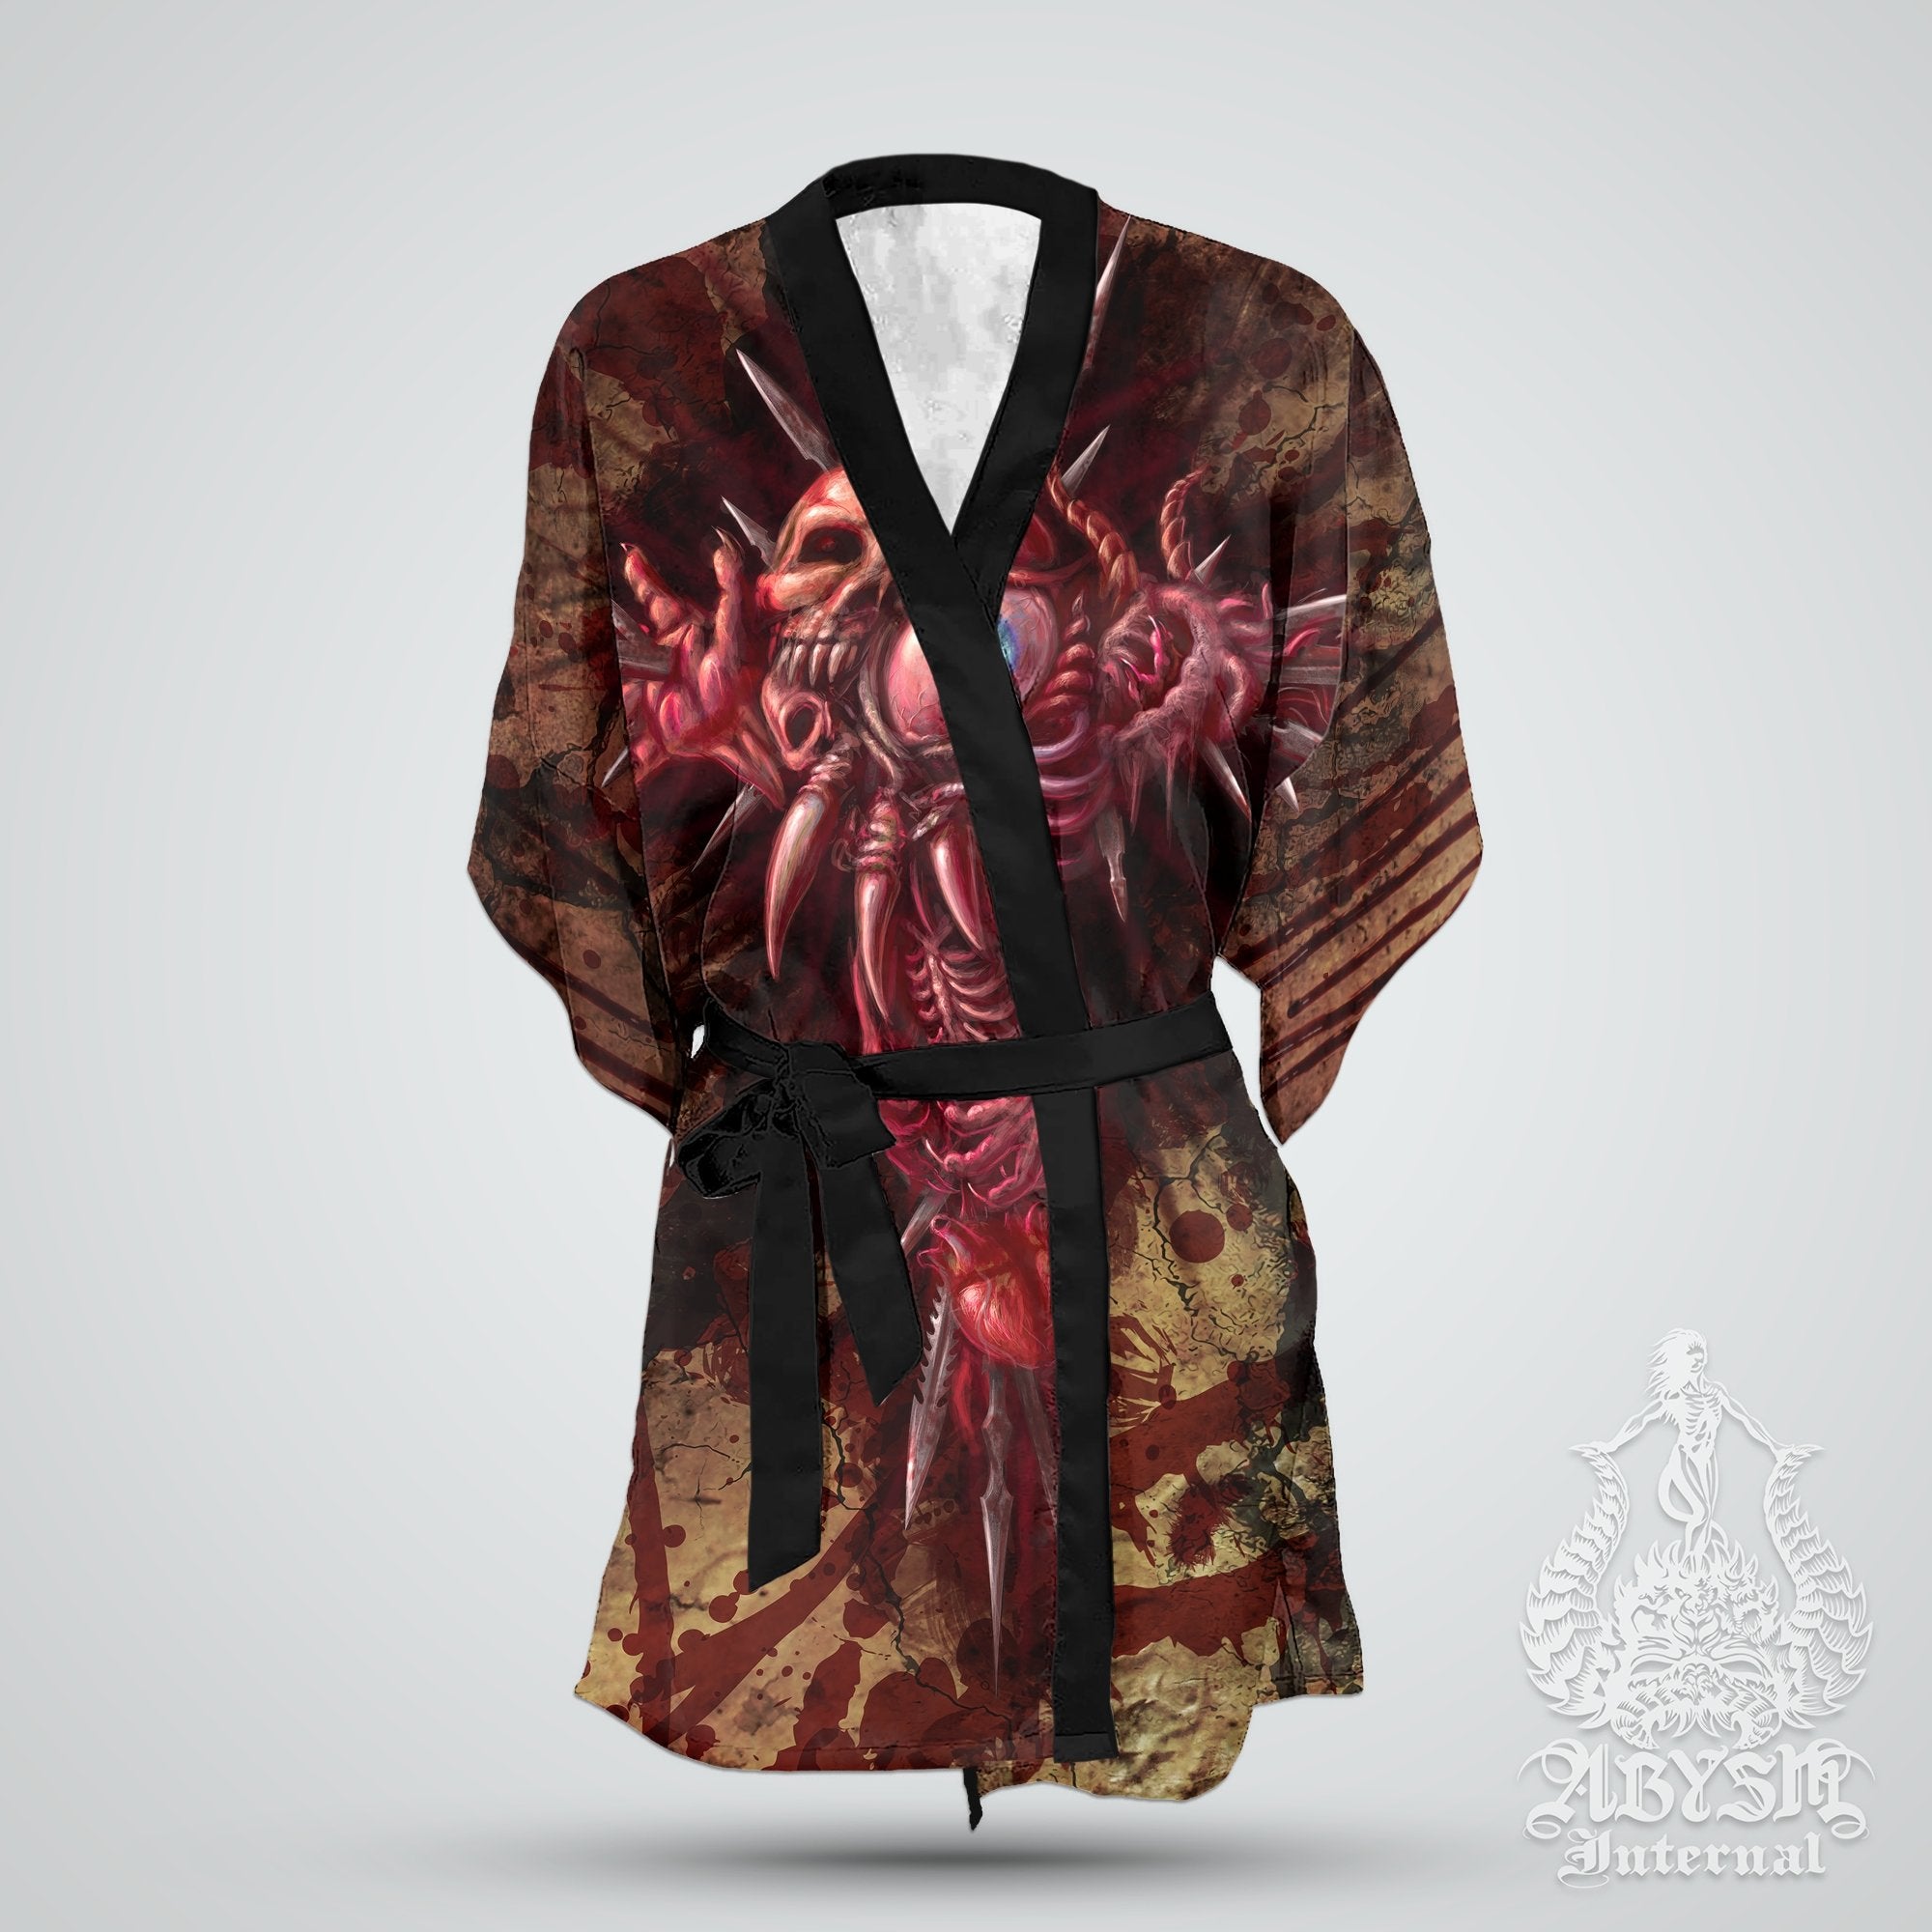 Horror Cover Up, Beach Outfit, Party Kimono, Halloween Summer Festival Robe, Indie and Alternative Clothing, Unisex - Gore and Blood Cross, Grunge - Abysm Internal